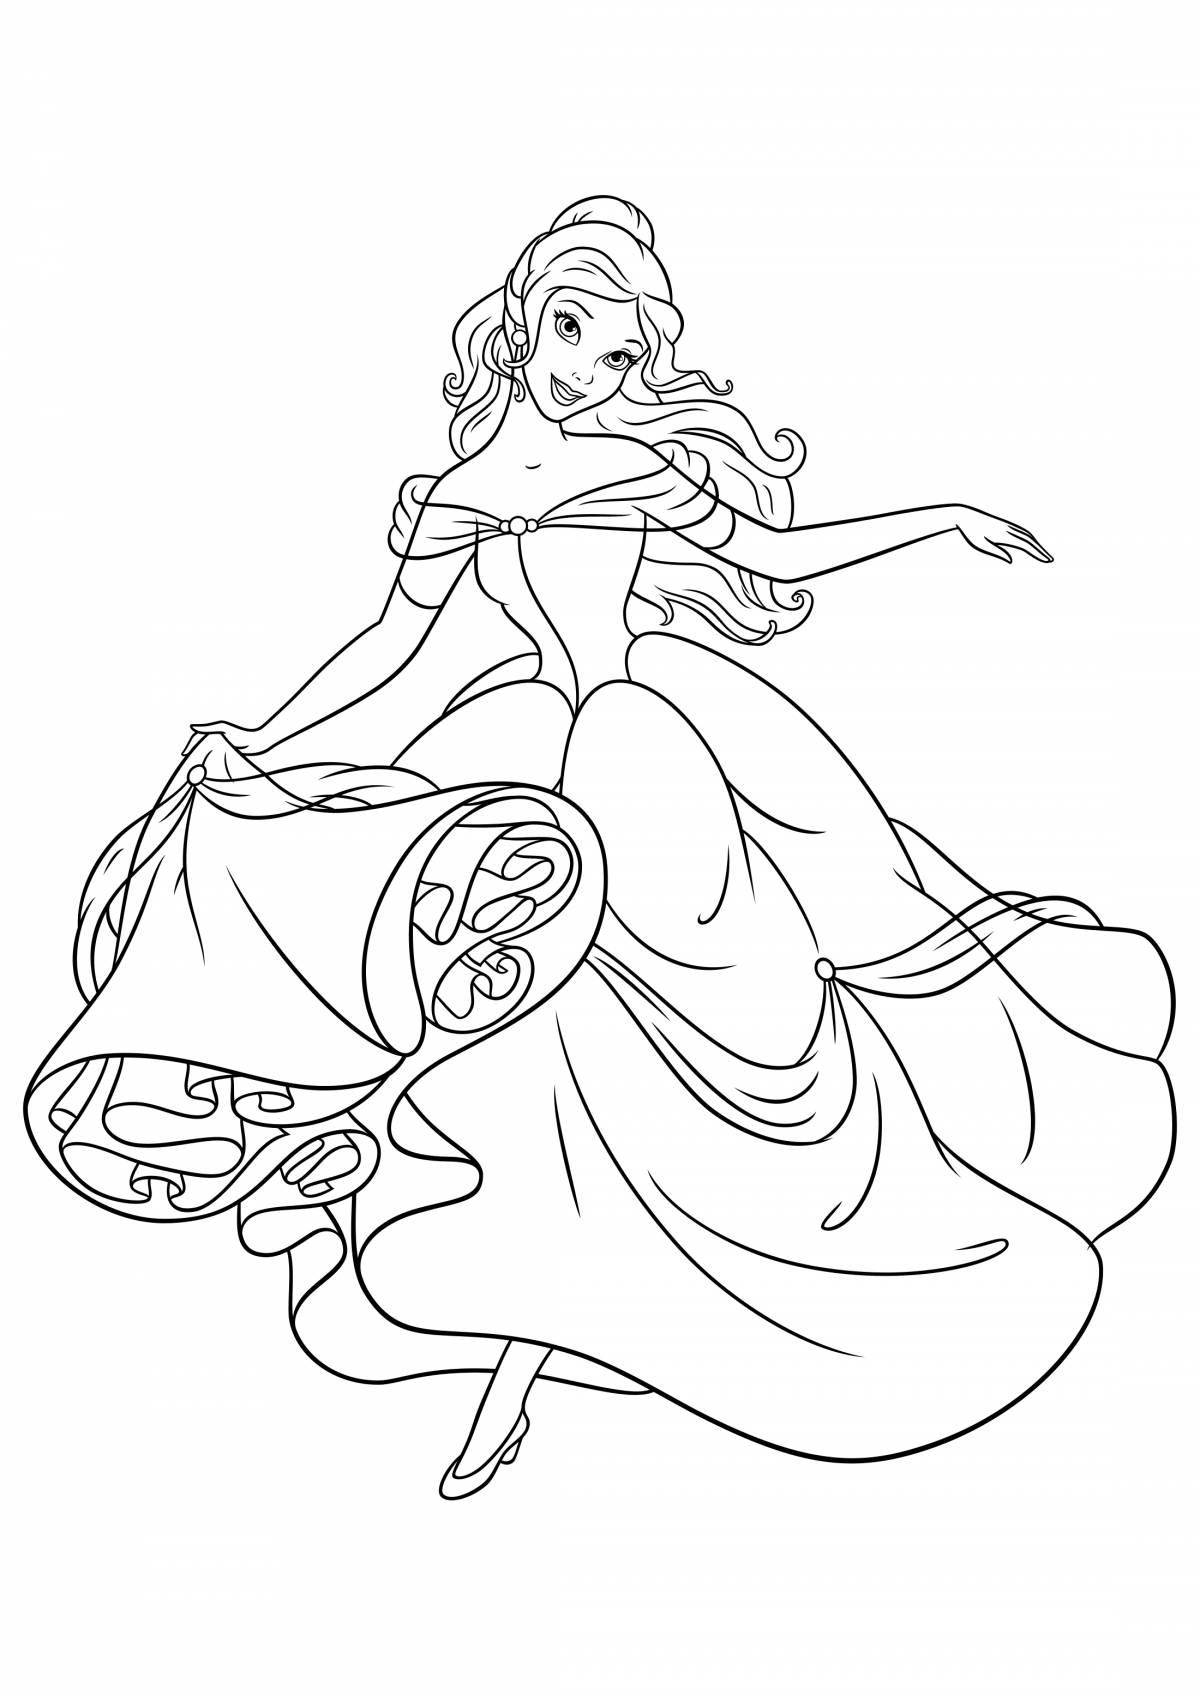 Awesome lingerie coloring pages for kids